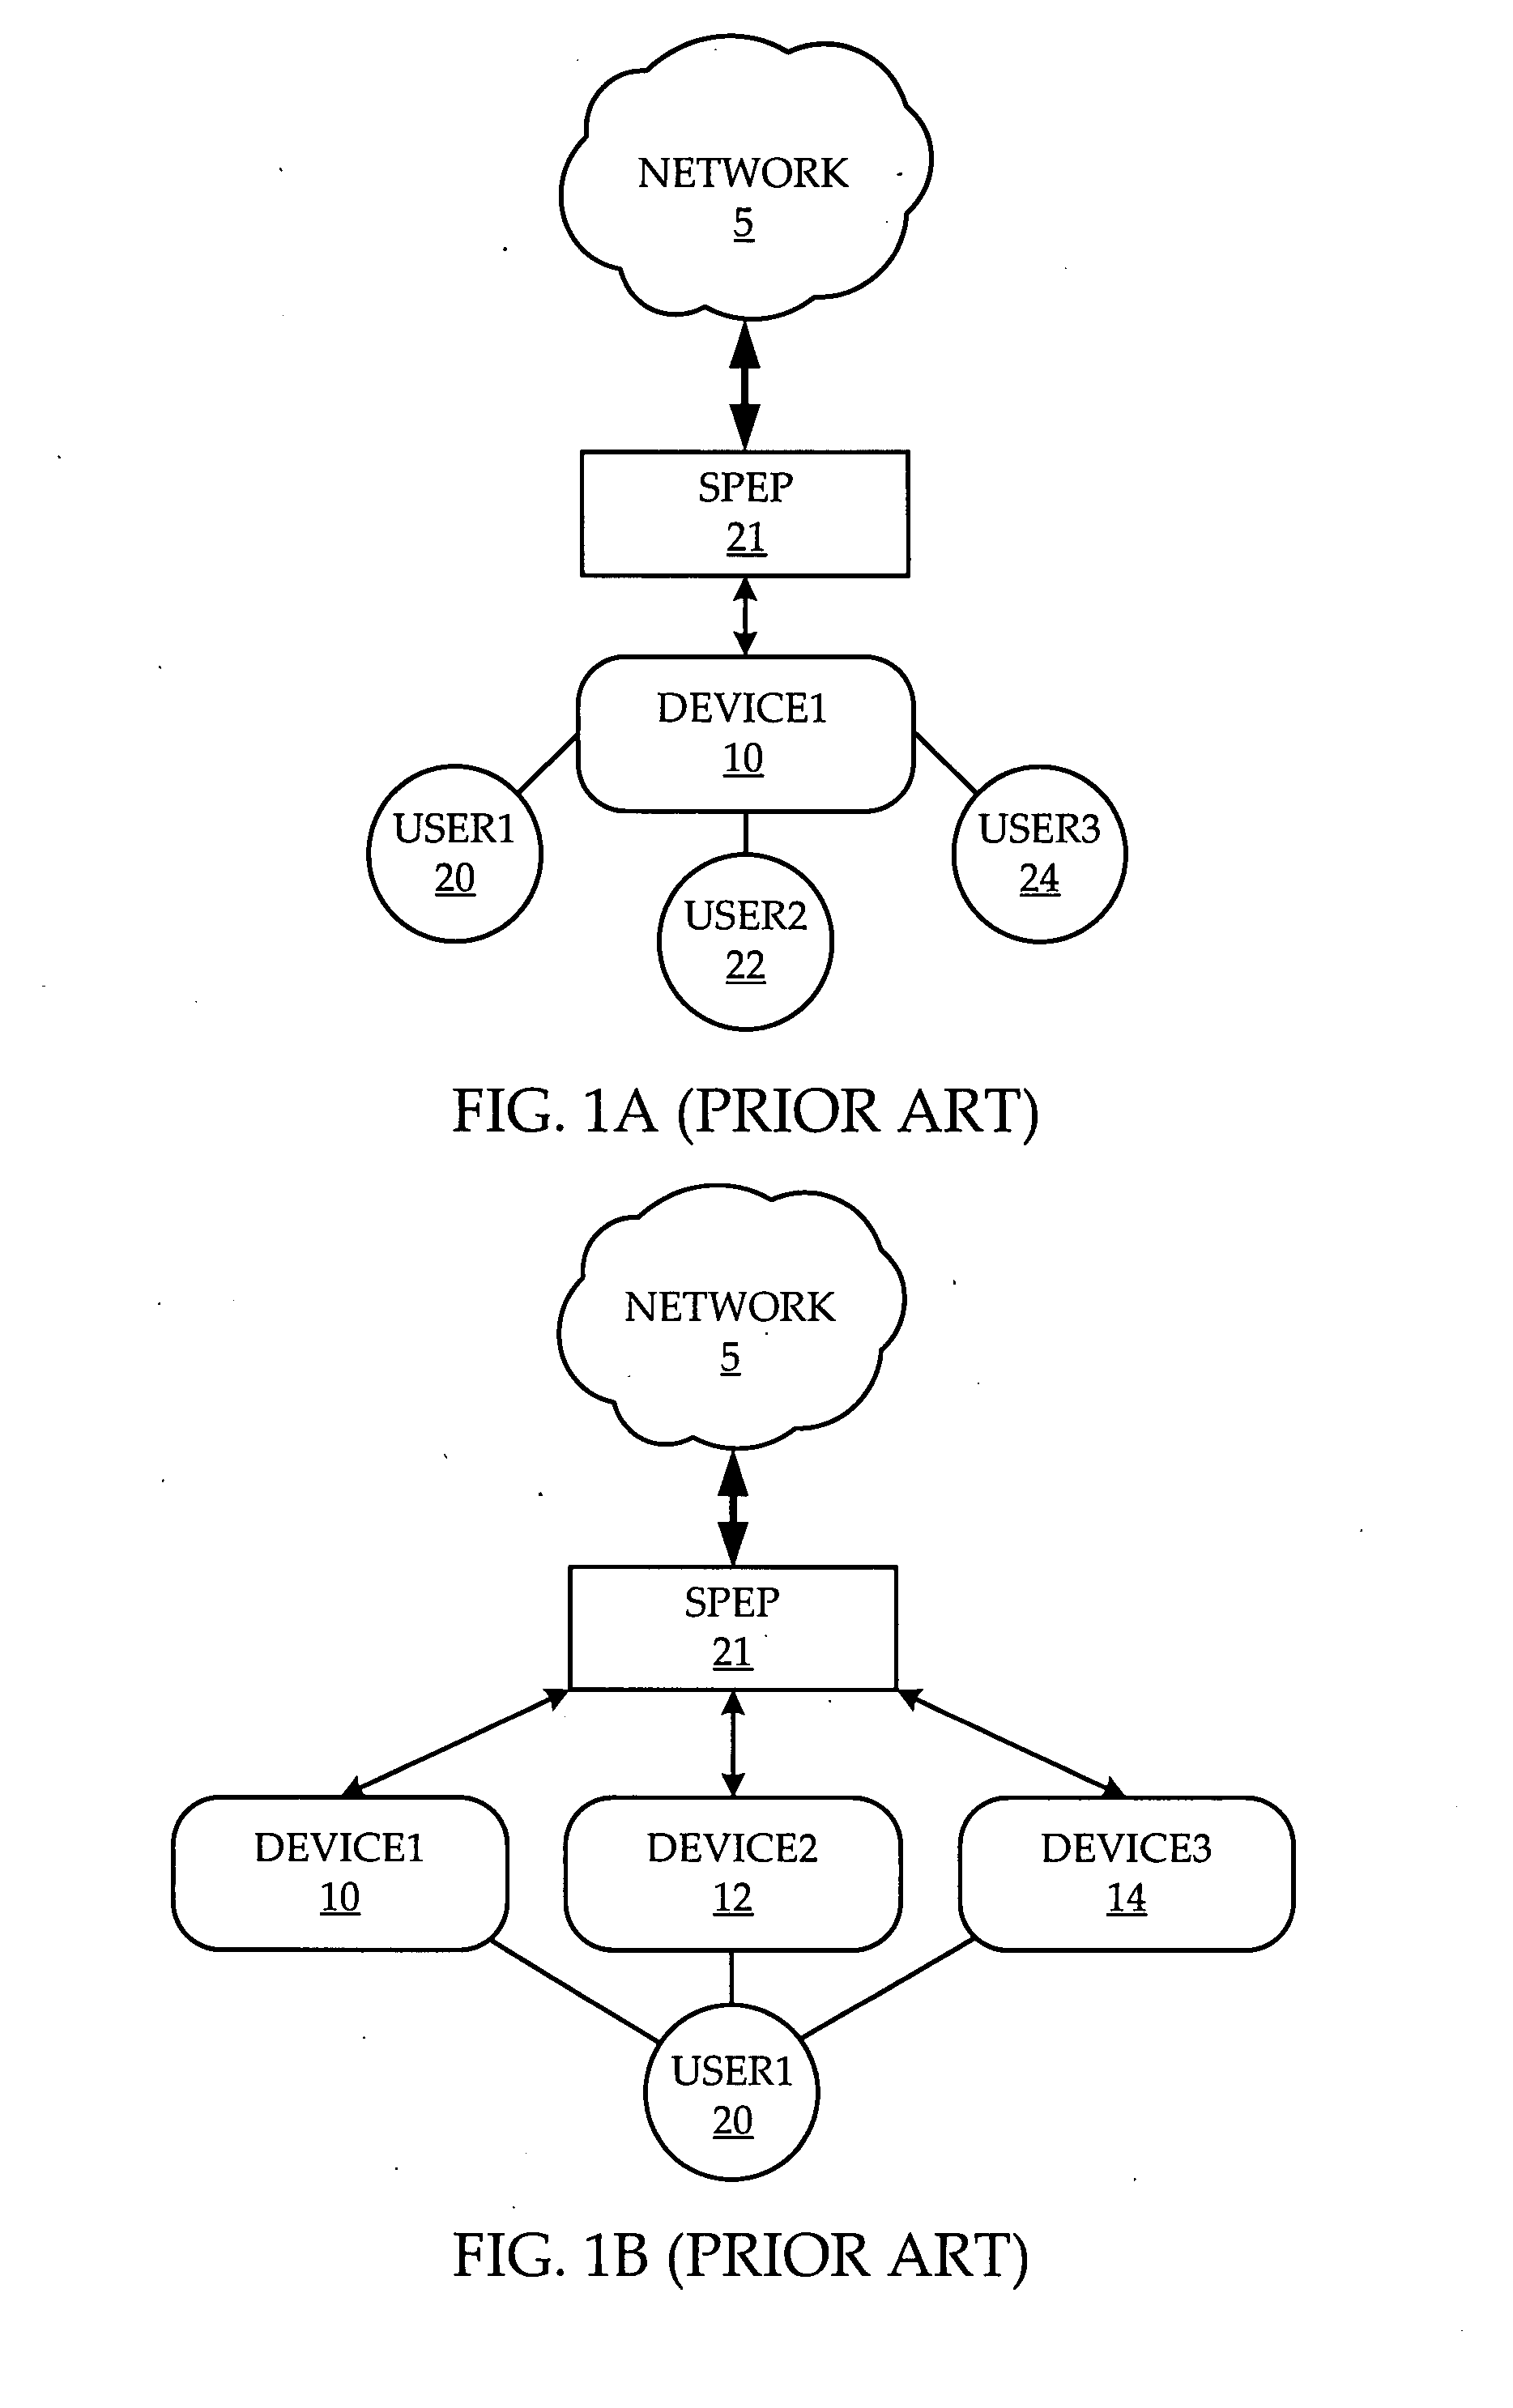 System and method of network access security policy management for multimodal device